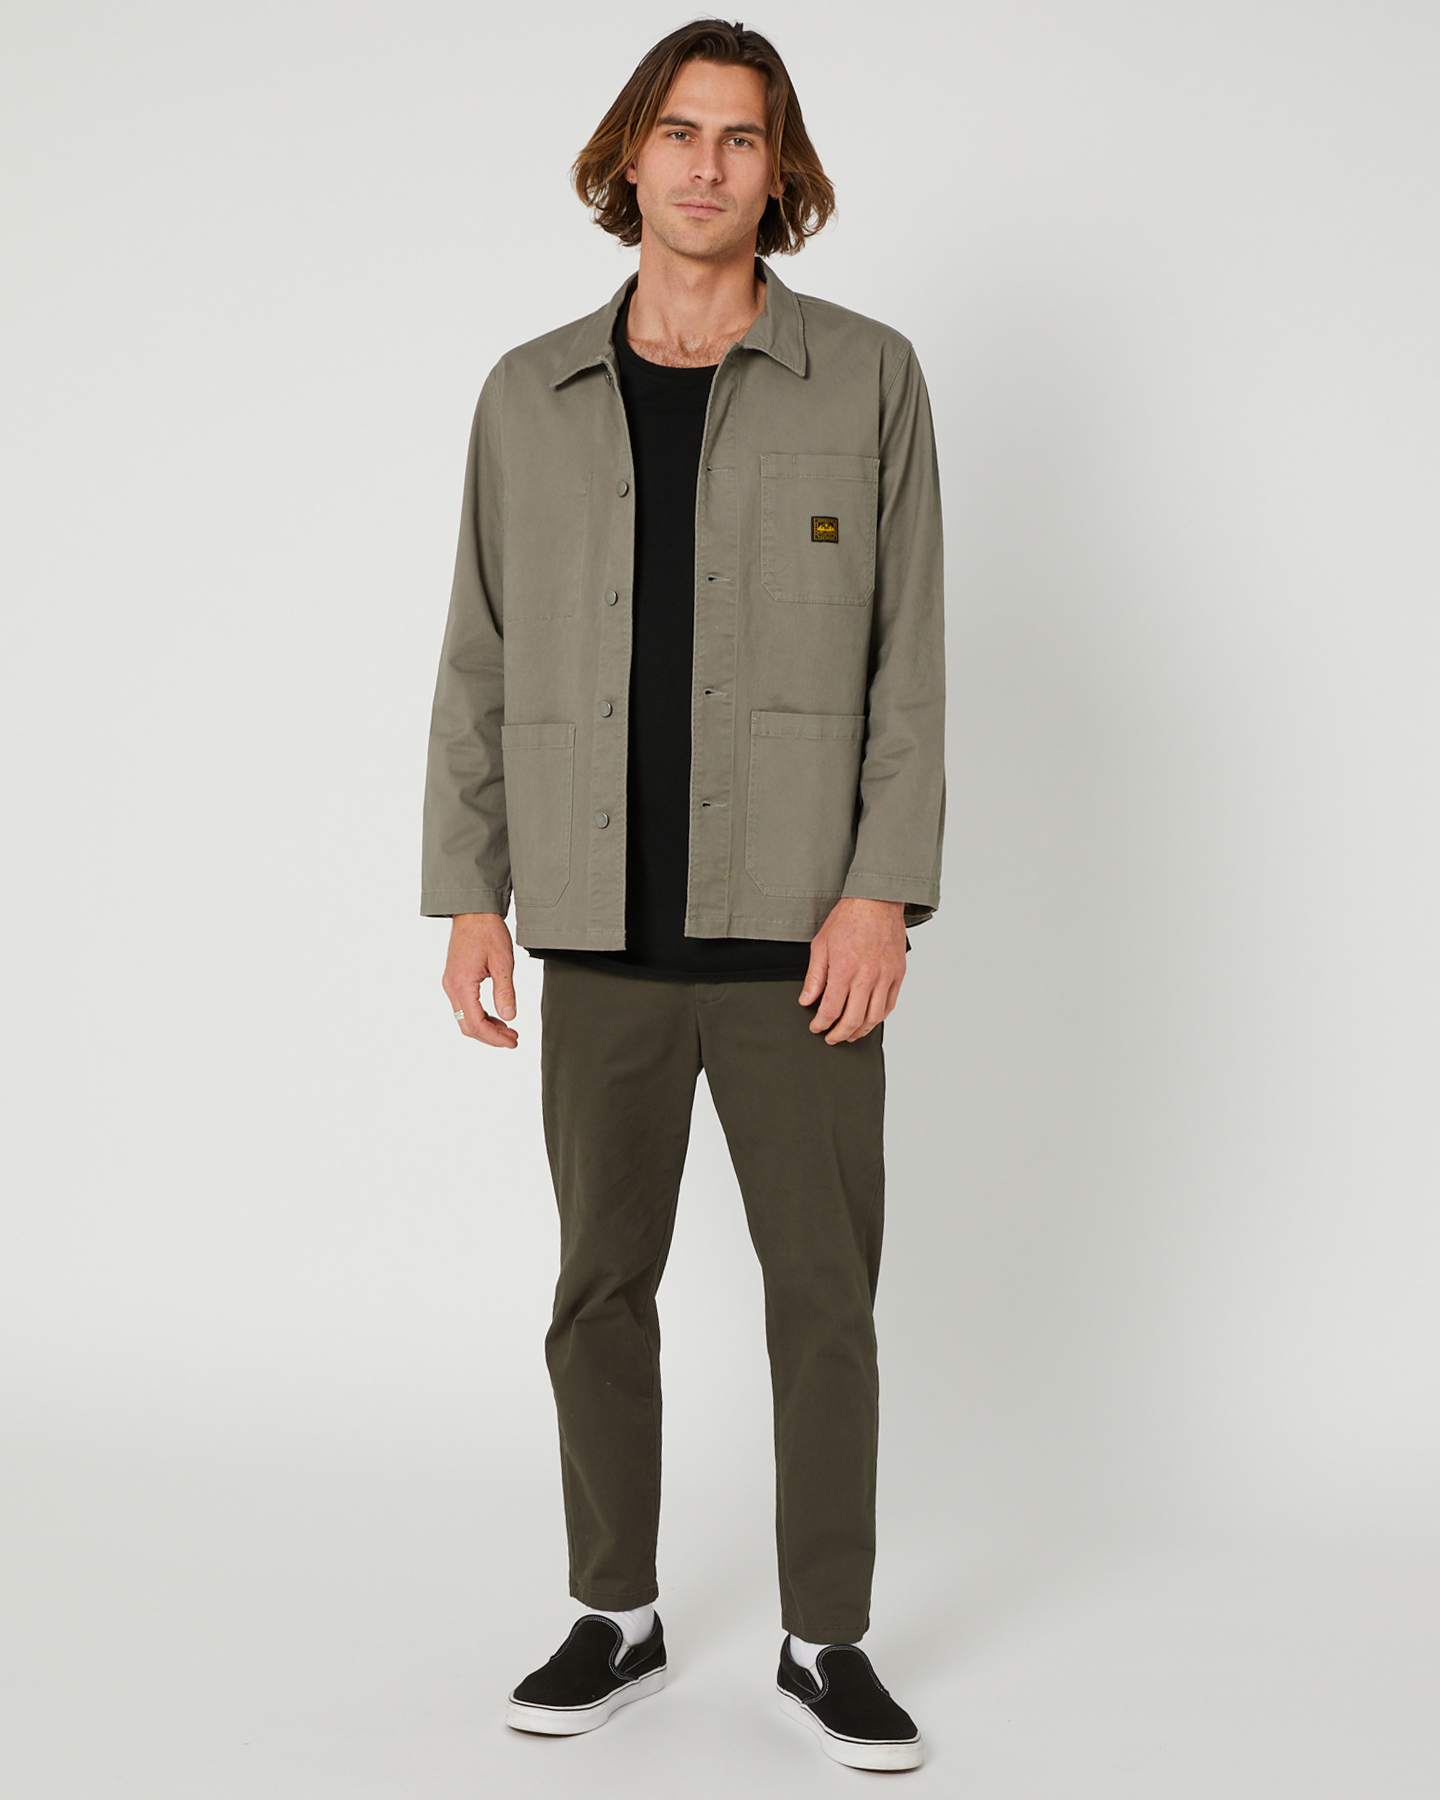 Depactus Carter Twill Chore Jacket - Military | SurfStitch